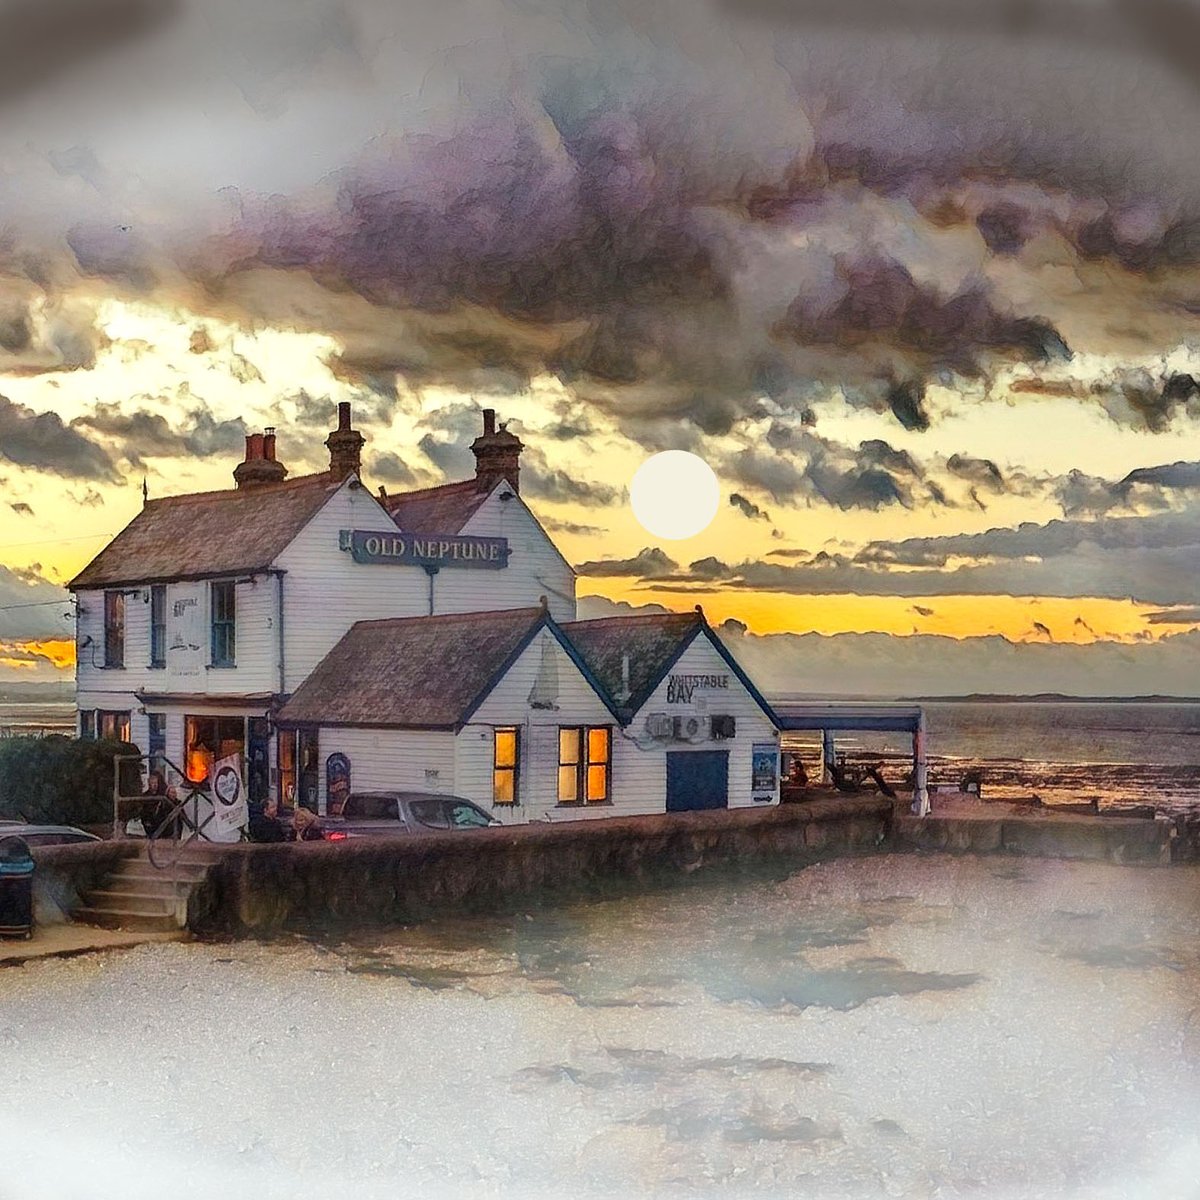 No visit to Whitstable is complete without a visit to 'The Neppie' on the beach - just waiting for a relaxing evening watching the sun set
#whitstable #northkent #seaside #seascape #pub #eveningdrink #holidaytime #seascape #welcome #art #artist #artwork #love